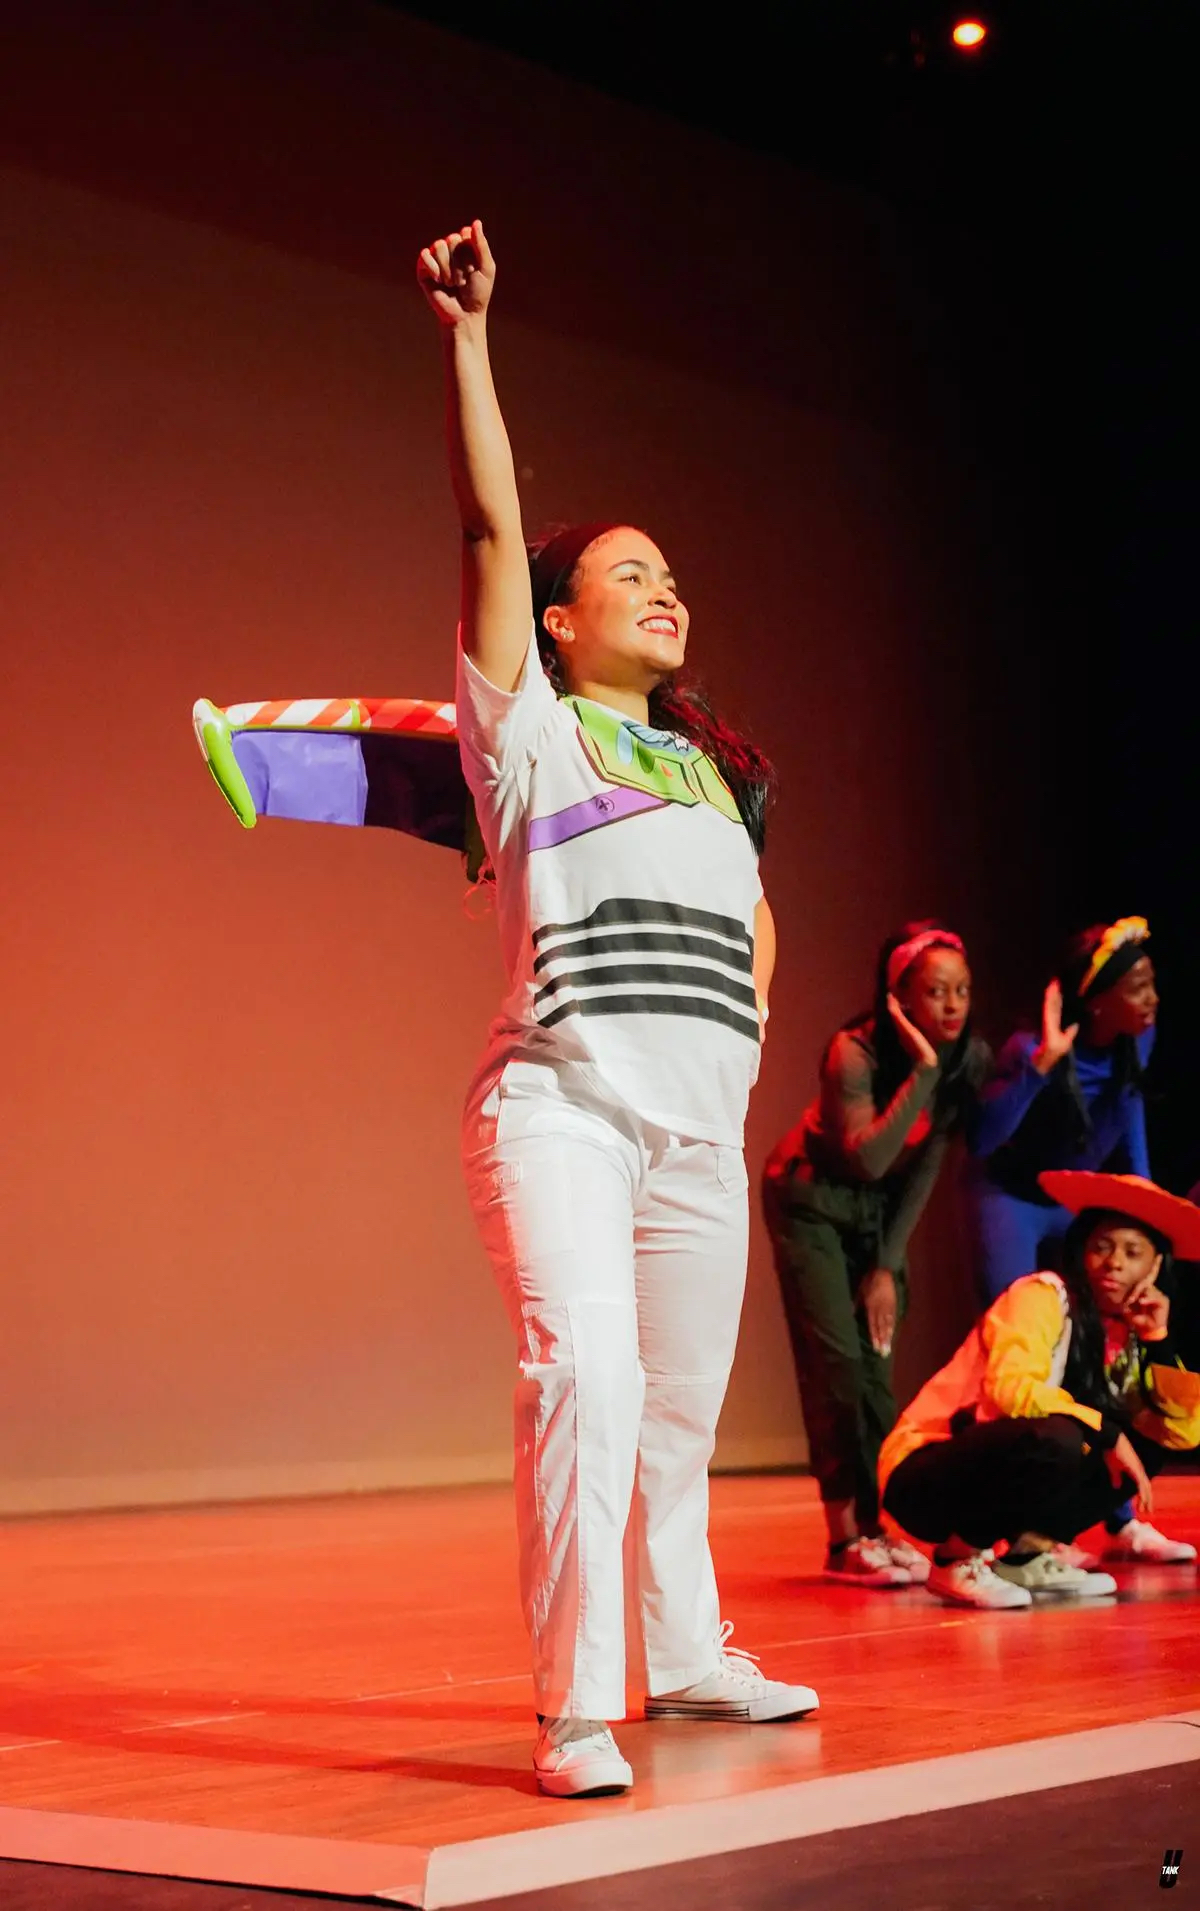 Sydney Mudd performs as Buzz Lightyear from Toy Story during the National Pan-Hellenic Council Homecoming Step Show in Fall 2022. Mudd is a member of the Delta Sigma Theta sorority. (Photo Courtesy: Sydney Mudd)